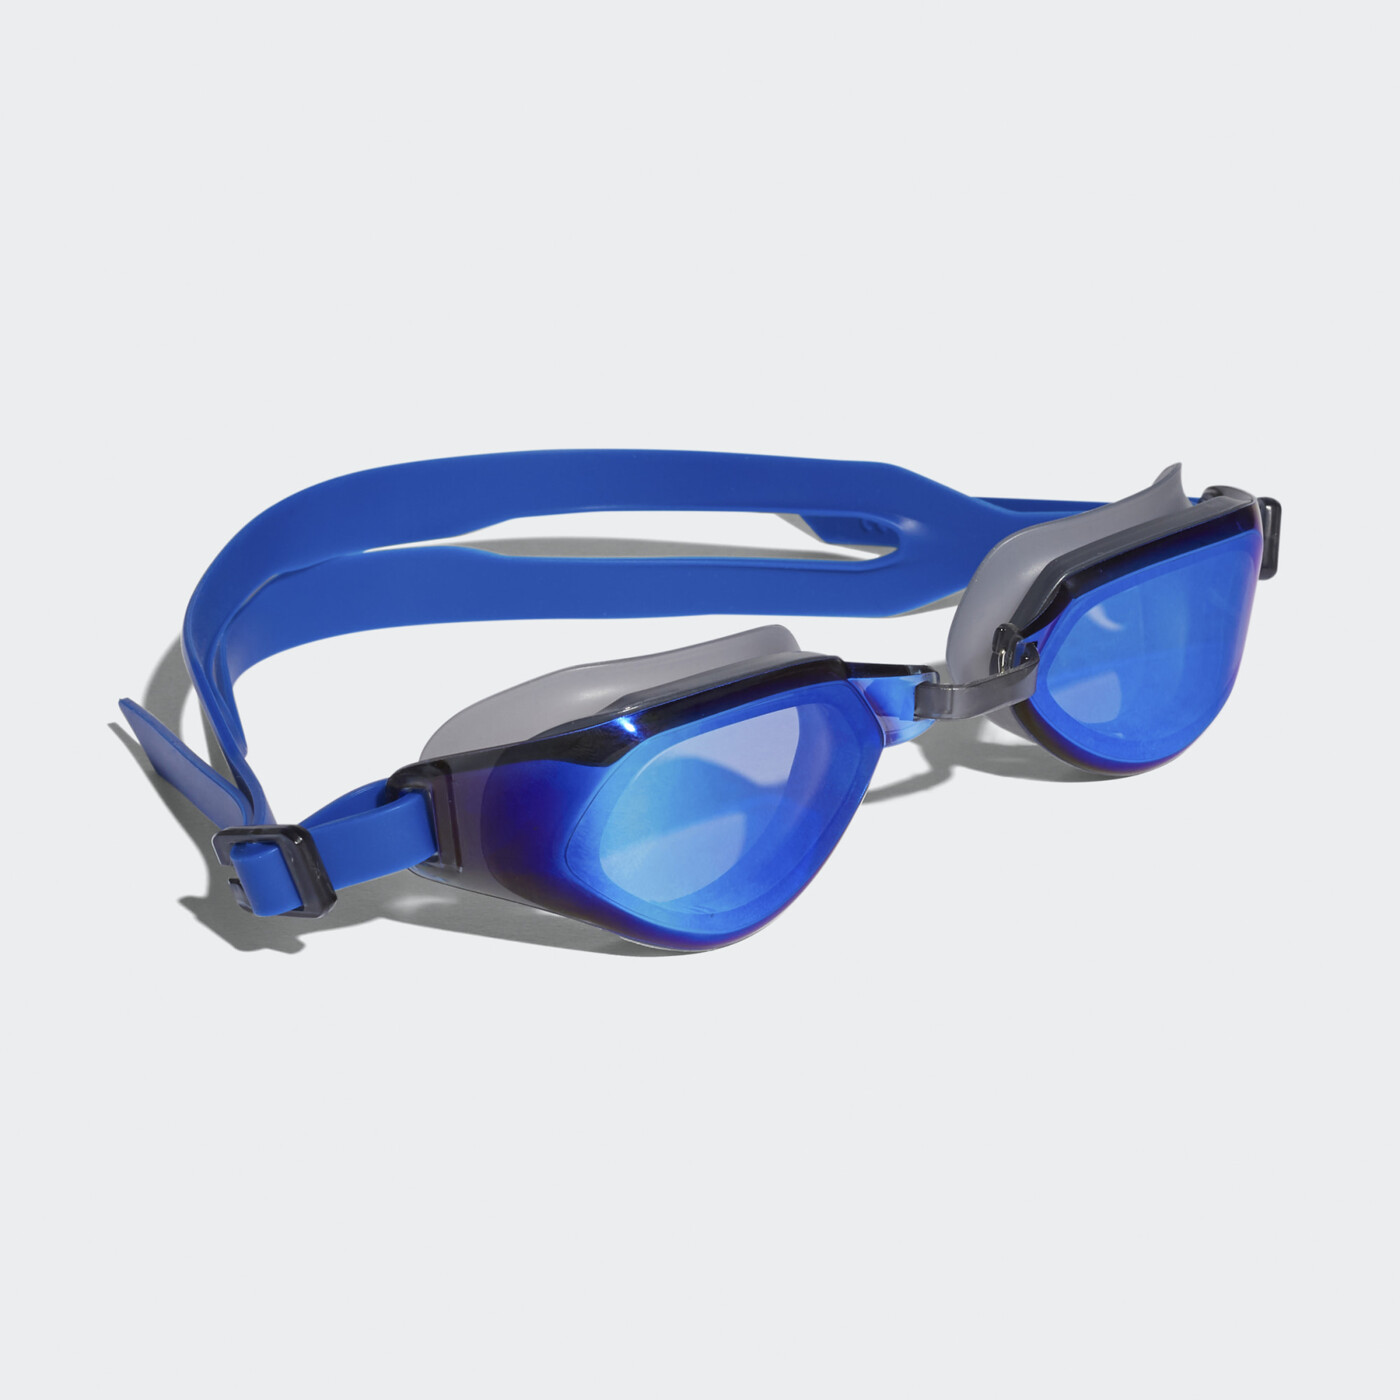 ADIDAS PERSISTAR FIT MIRRORED SCHWIMMBRILLE